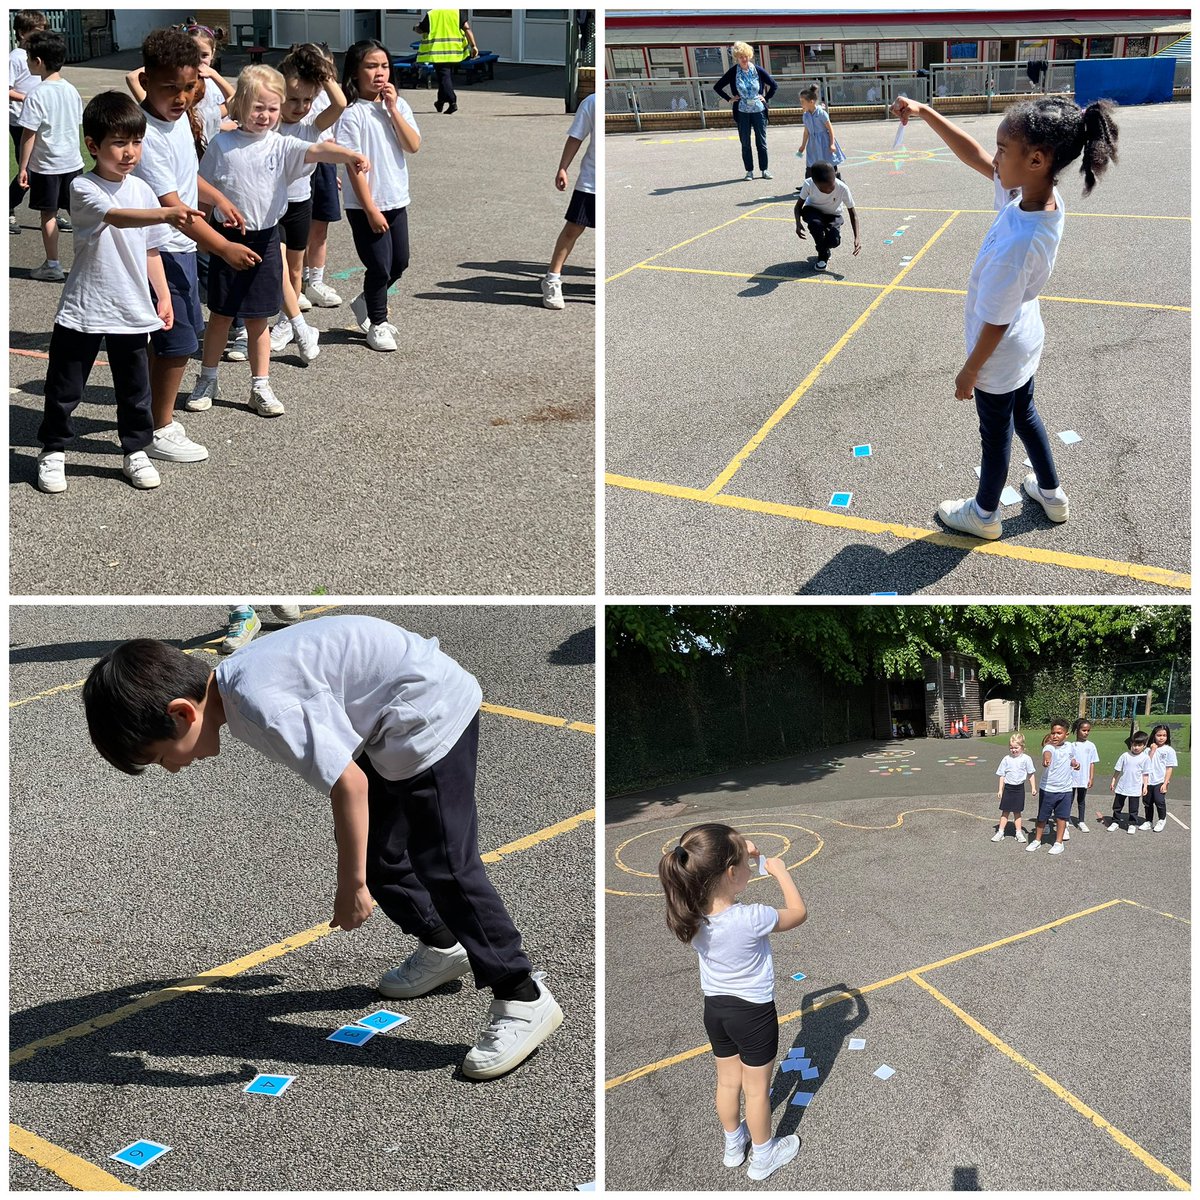 In our team building activities during PE, Year One collaborated to conquer a series of challenges and games by effectively communicating with one another.